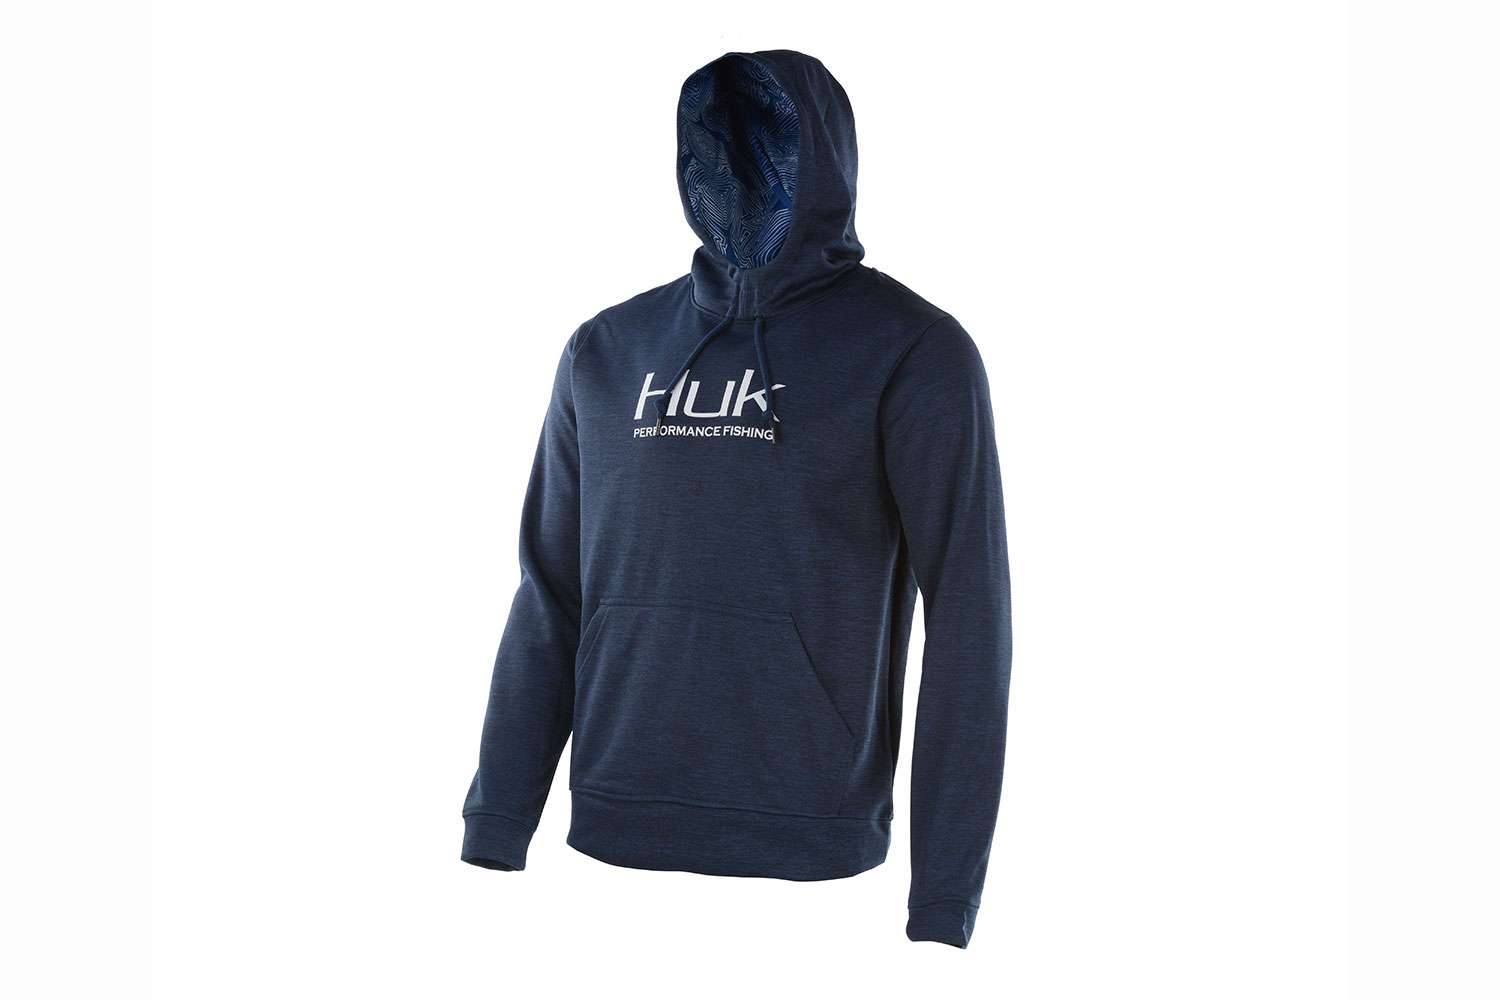 <p><b>Huk Hull Hoodie</b></p>
Traditional sweatshirt cuts offer casual comfort with softshell-like performance thanks to 100% polyester performance fleece. The soft-brushed interior fabric is highly water resistant on the outside thanks to a DWR coating. The 2-way stretch for flexibility works with the required movements anglers execute every day on the water.  Available in crew neck, hoodie and full zip hoodie and sizes S-XXXL, and two colors.<br>
<p><b>MSRP $55-$65</b></p>
<a href=